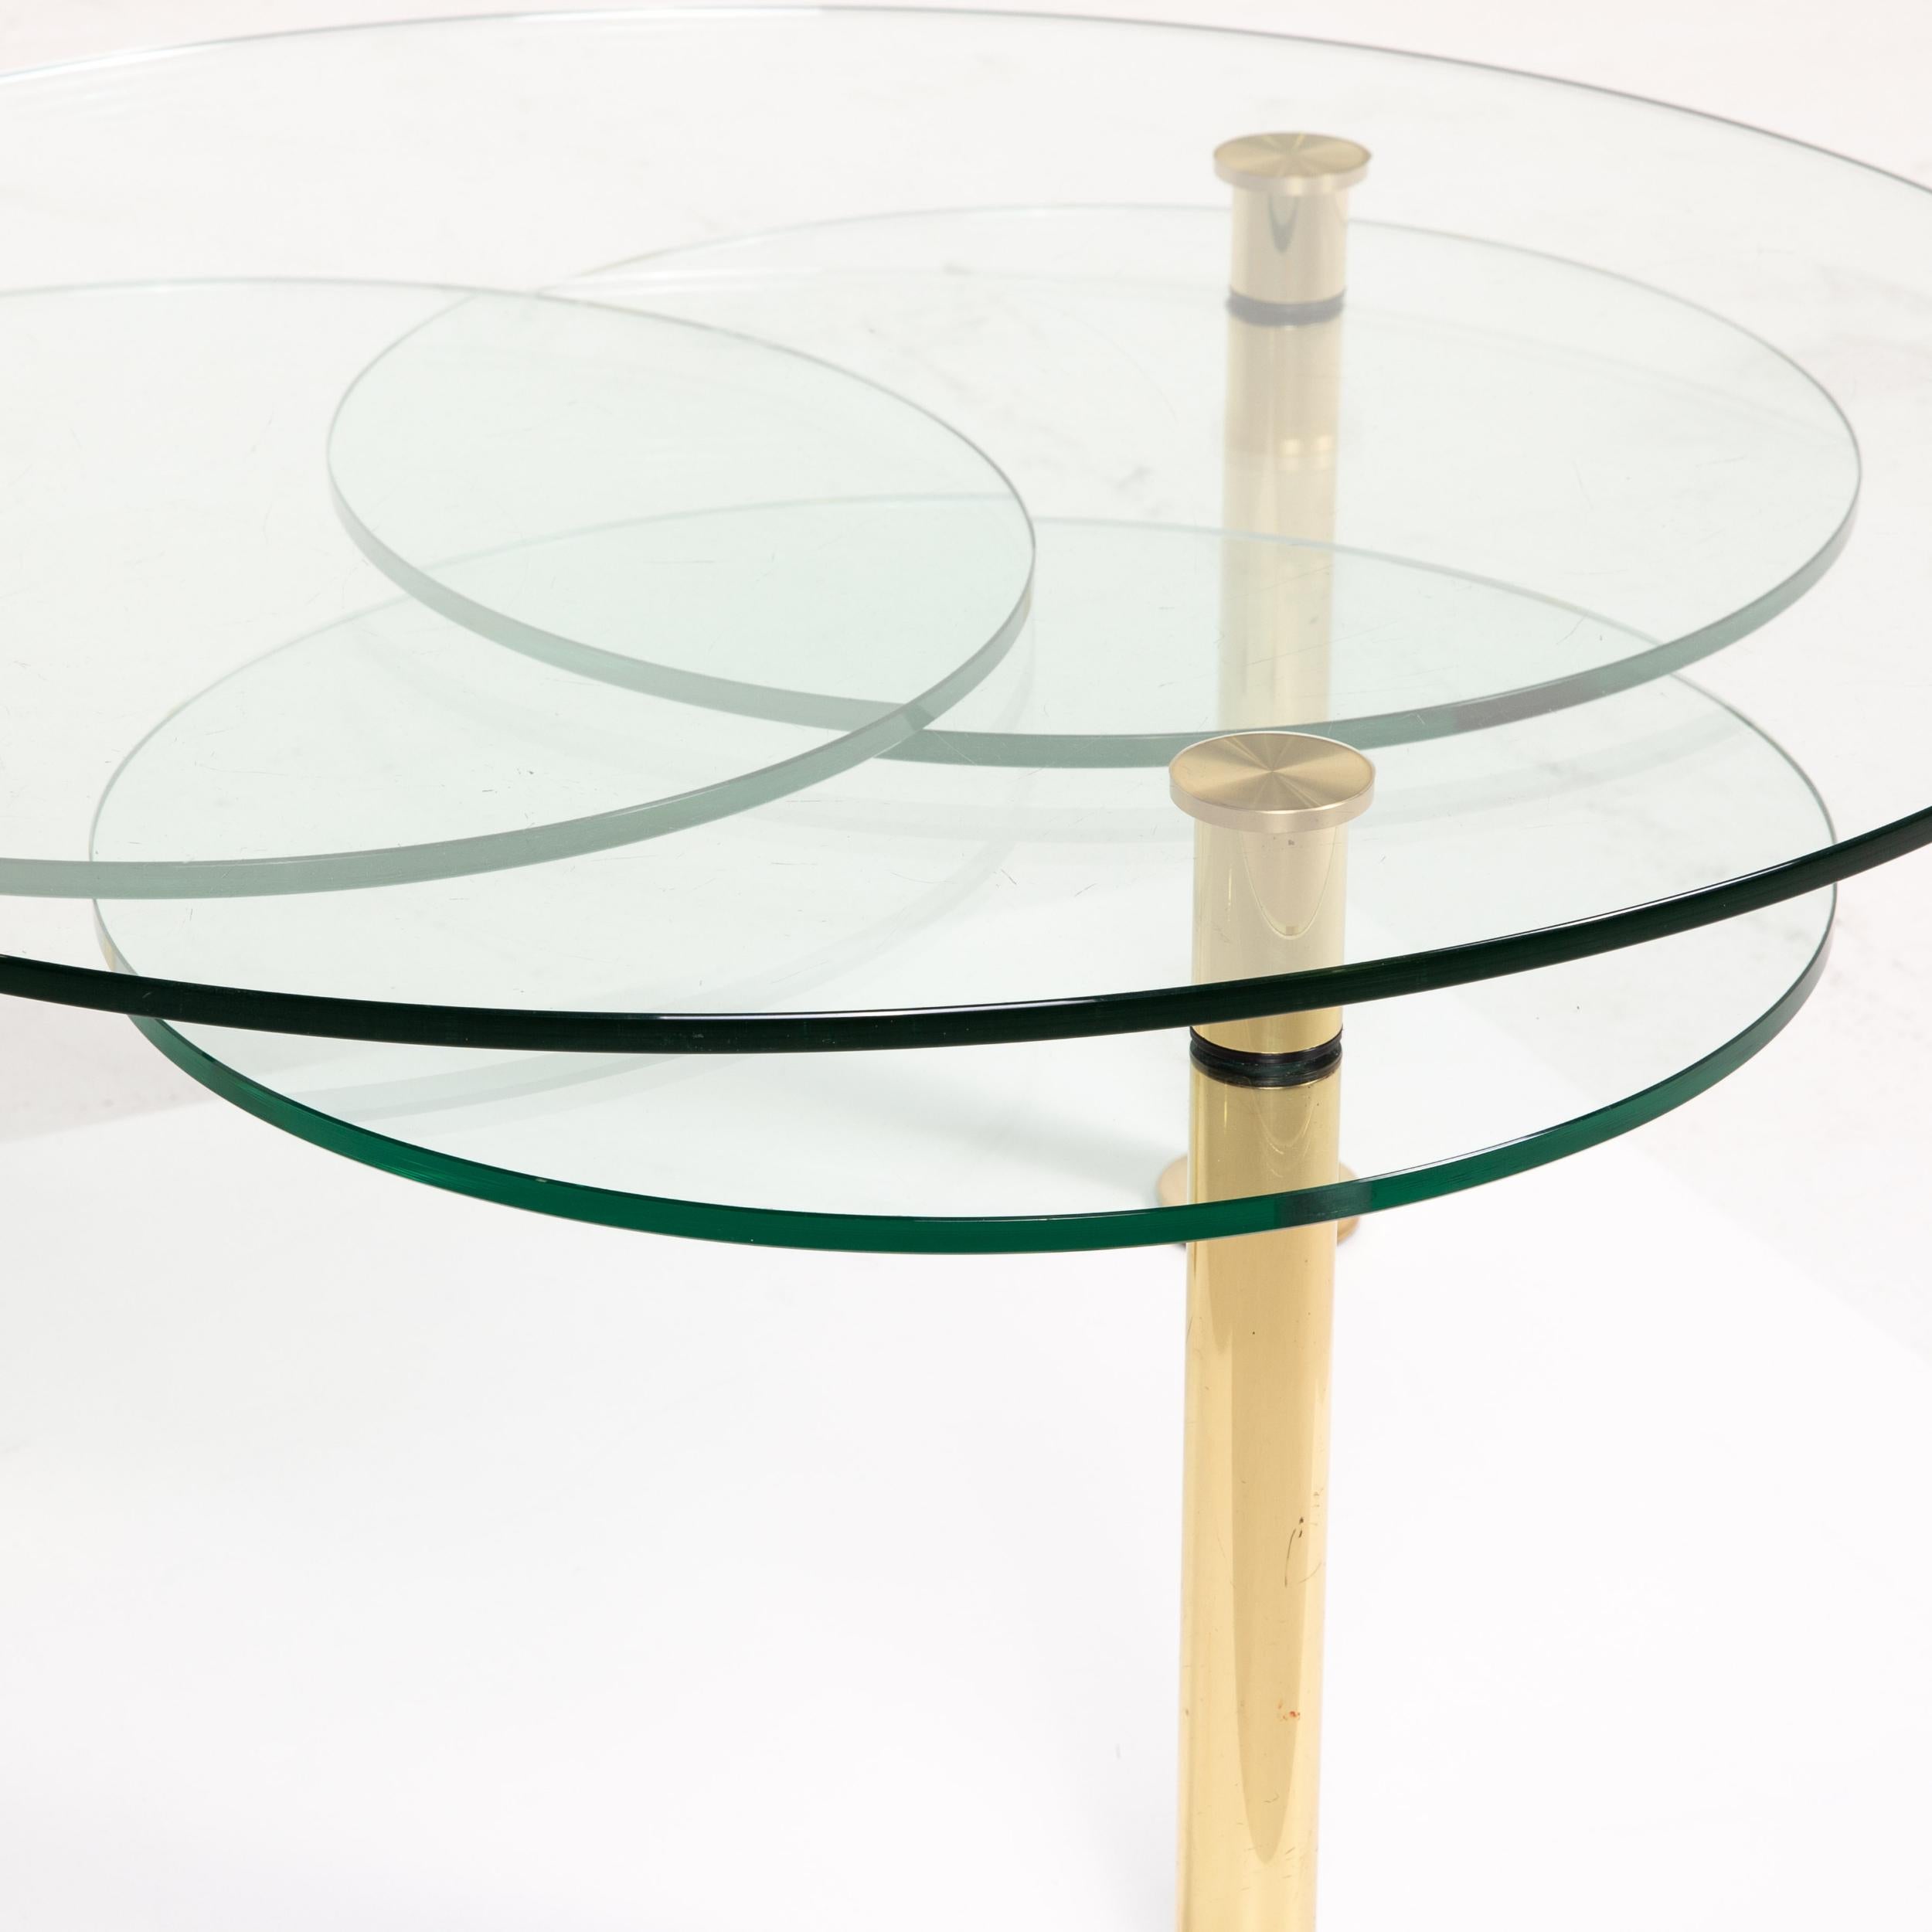 European Ronald Schmitt Glass Coffee Table Gold Function Adjustable Table For Sale